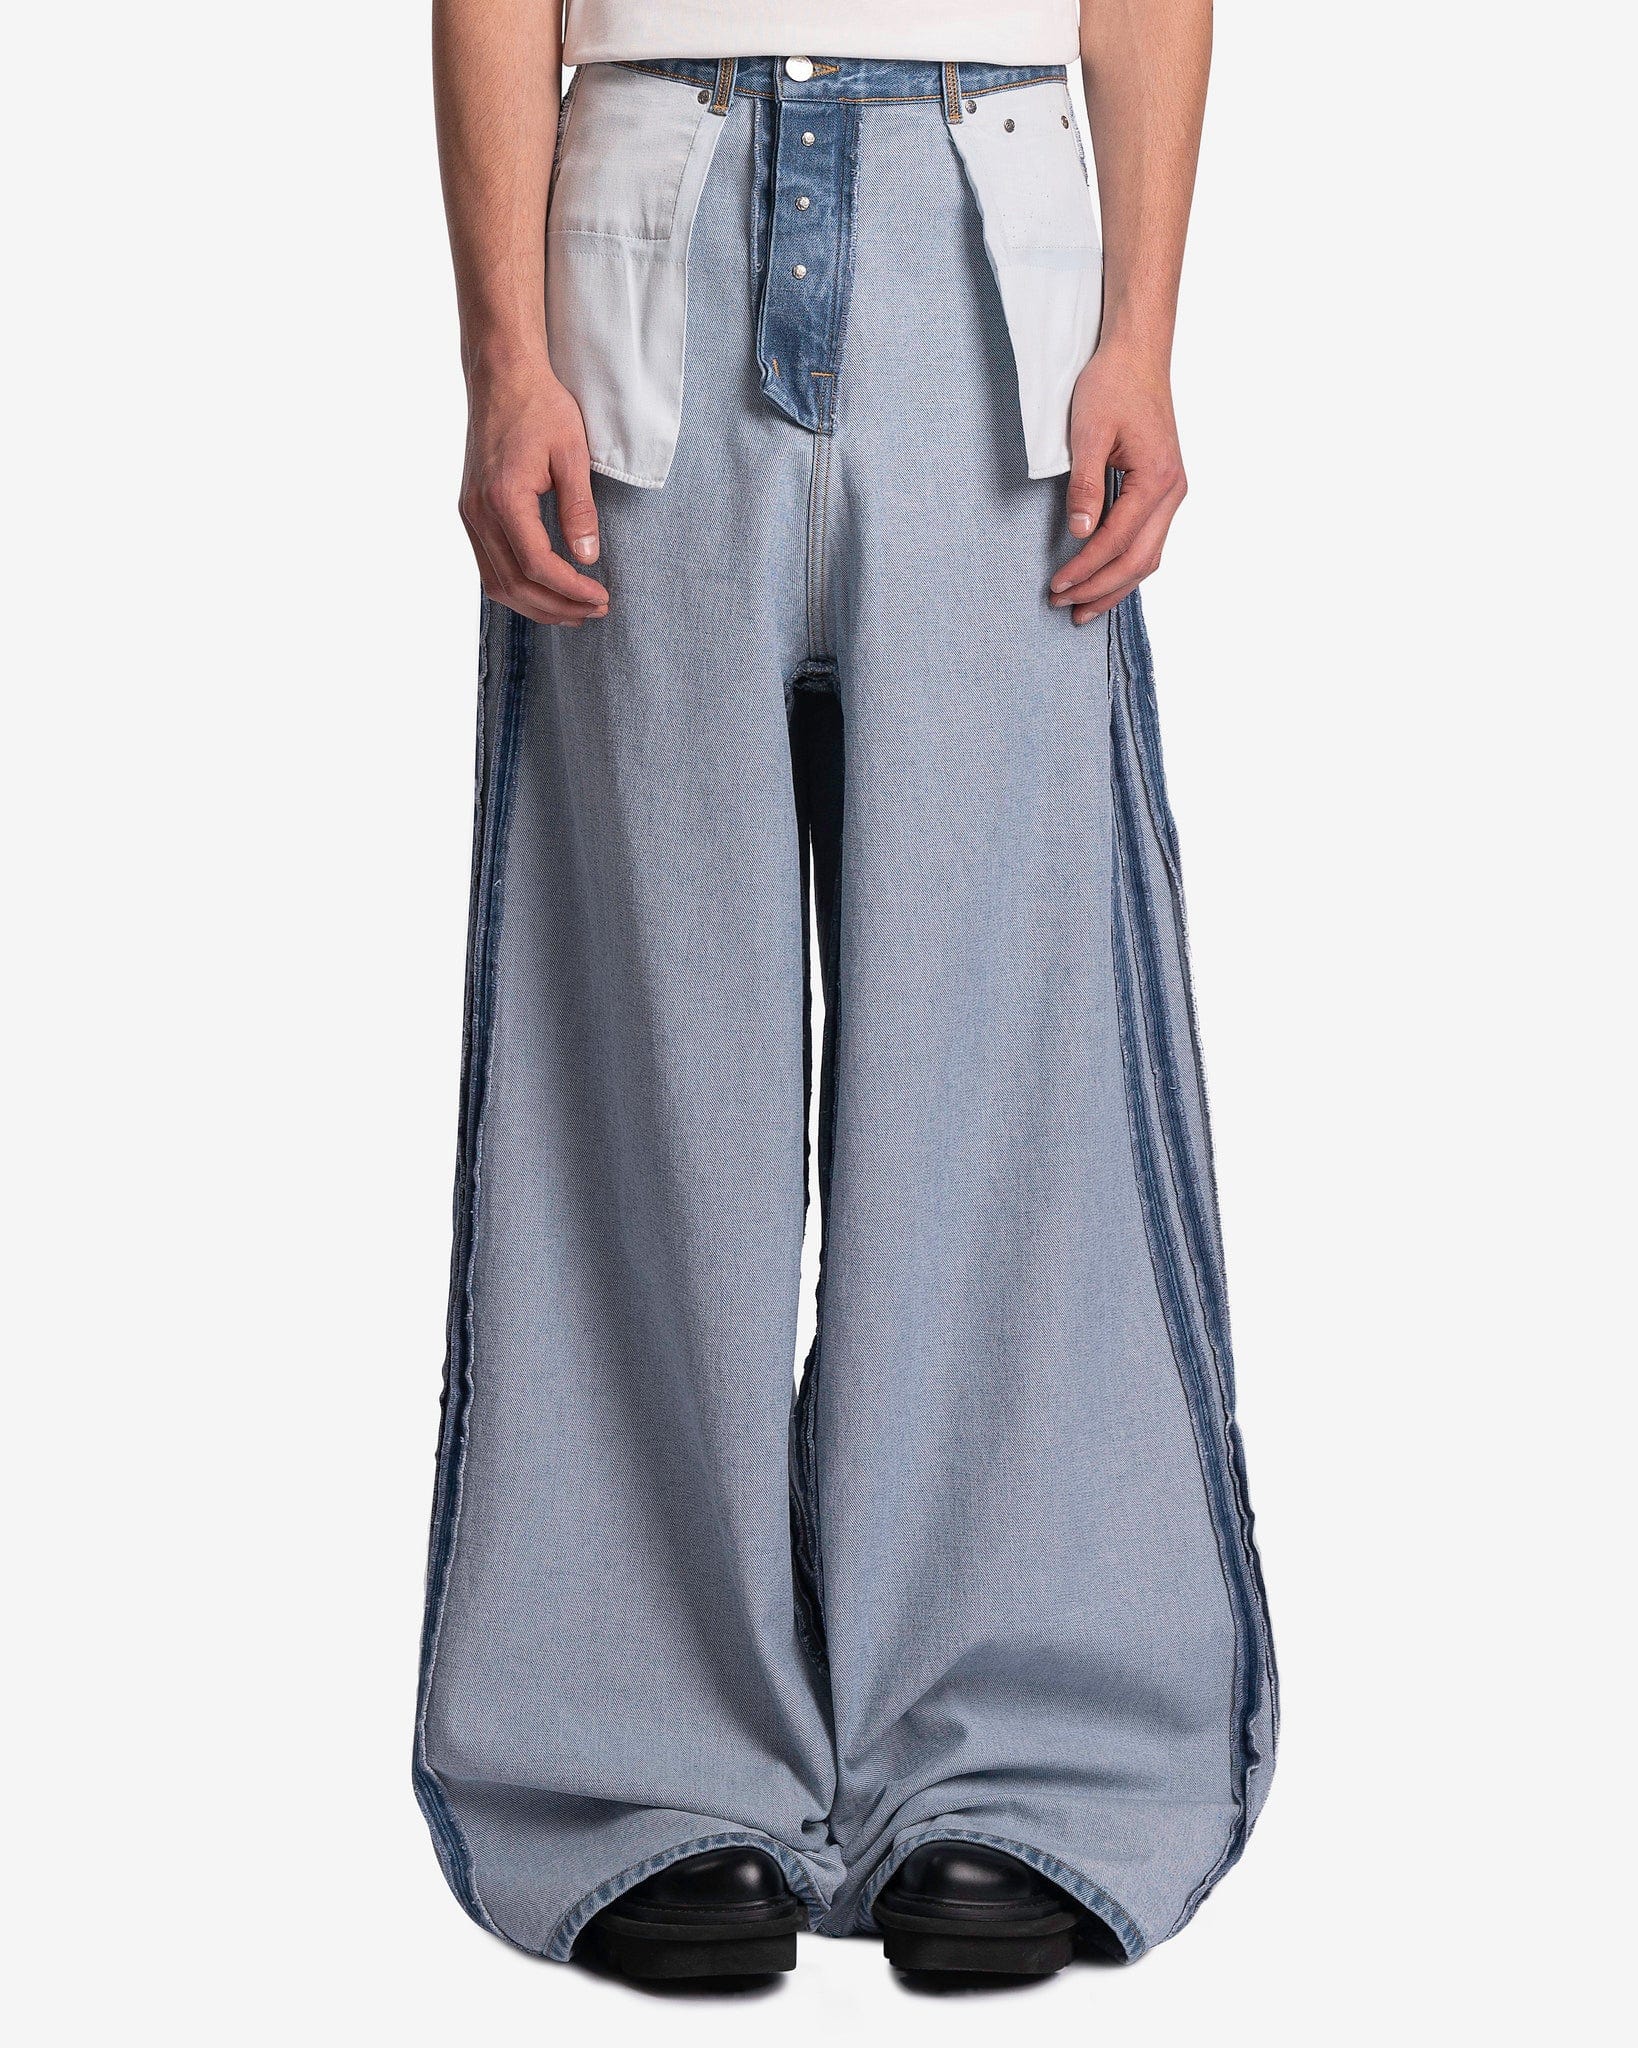 Inside-Out Baggy Jeans in Light Blue